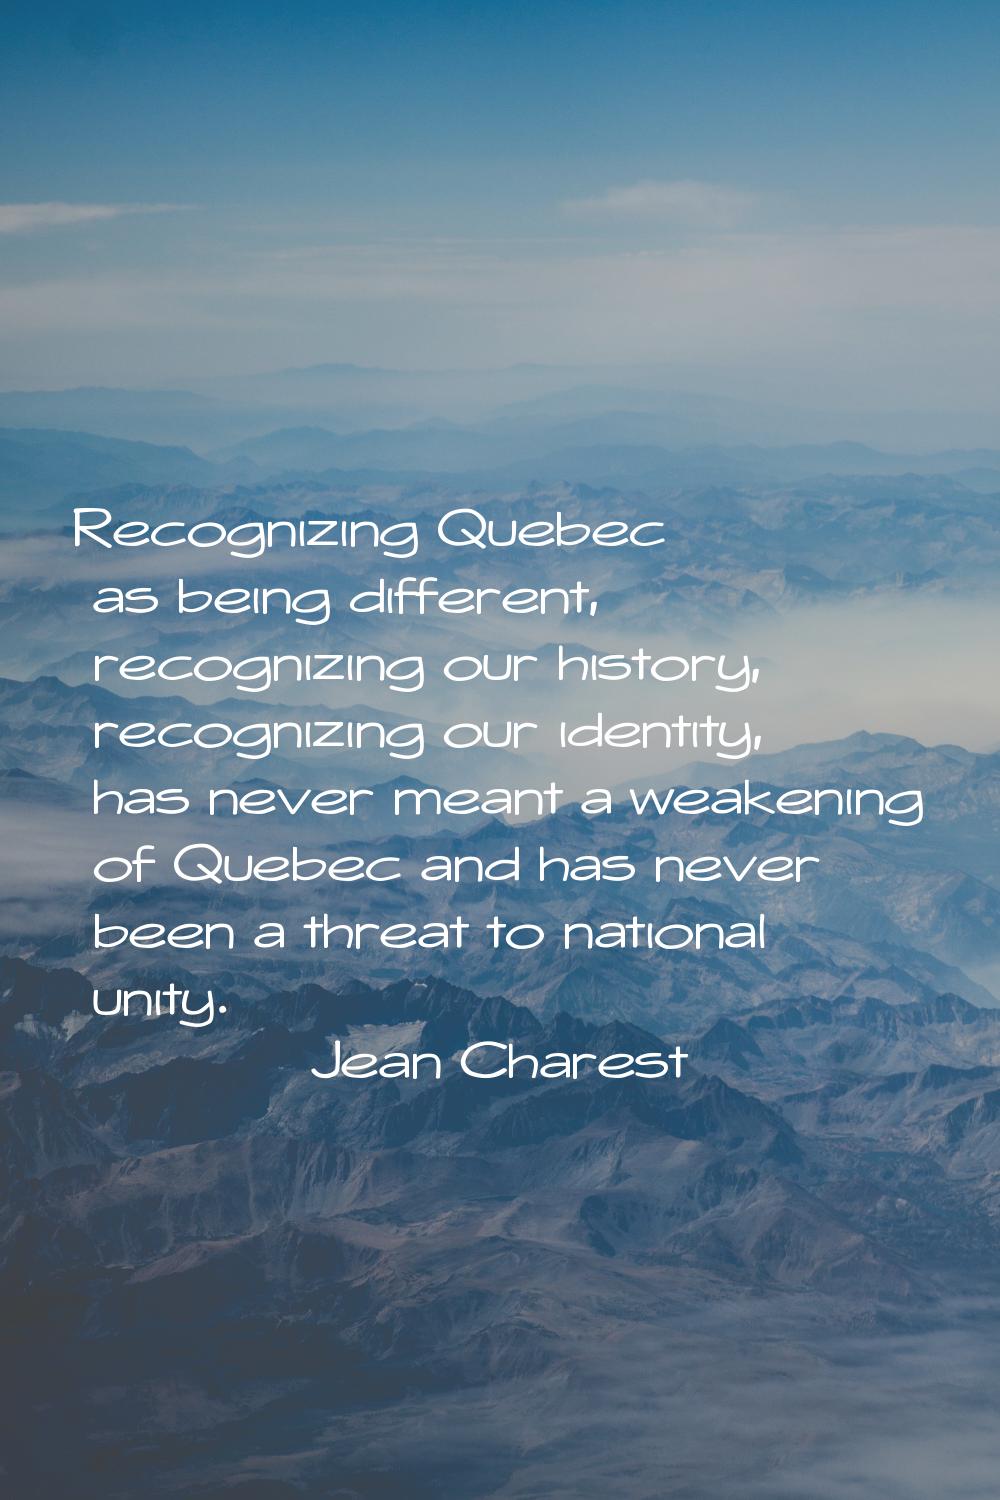 Recognizing Quebec as being different, recognizing our history, recognizing our identity, has never